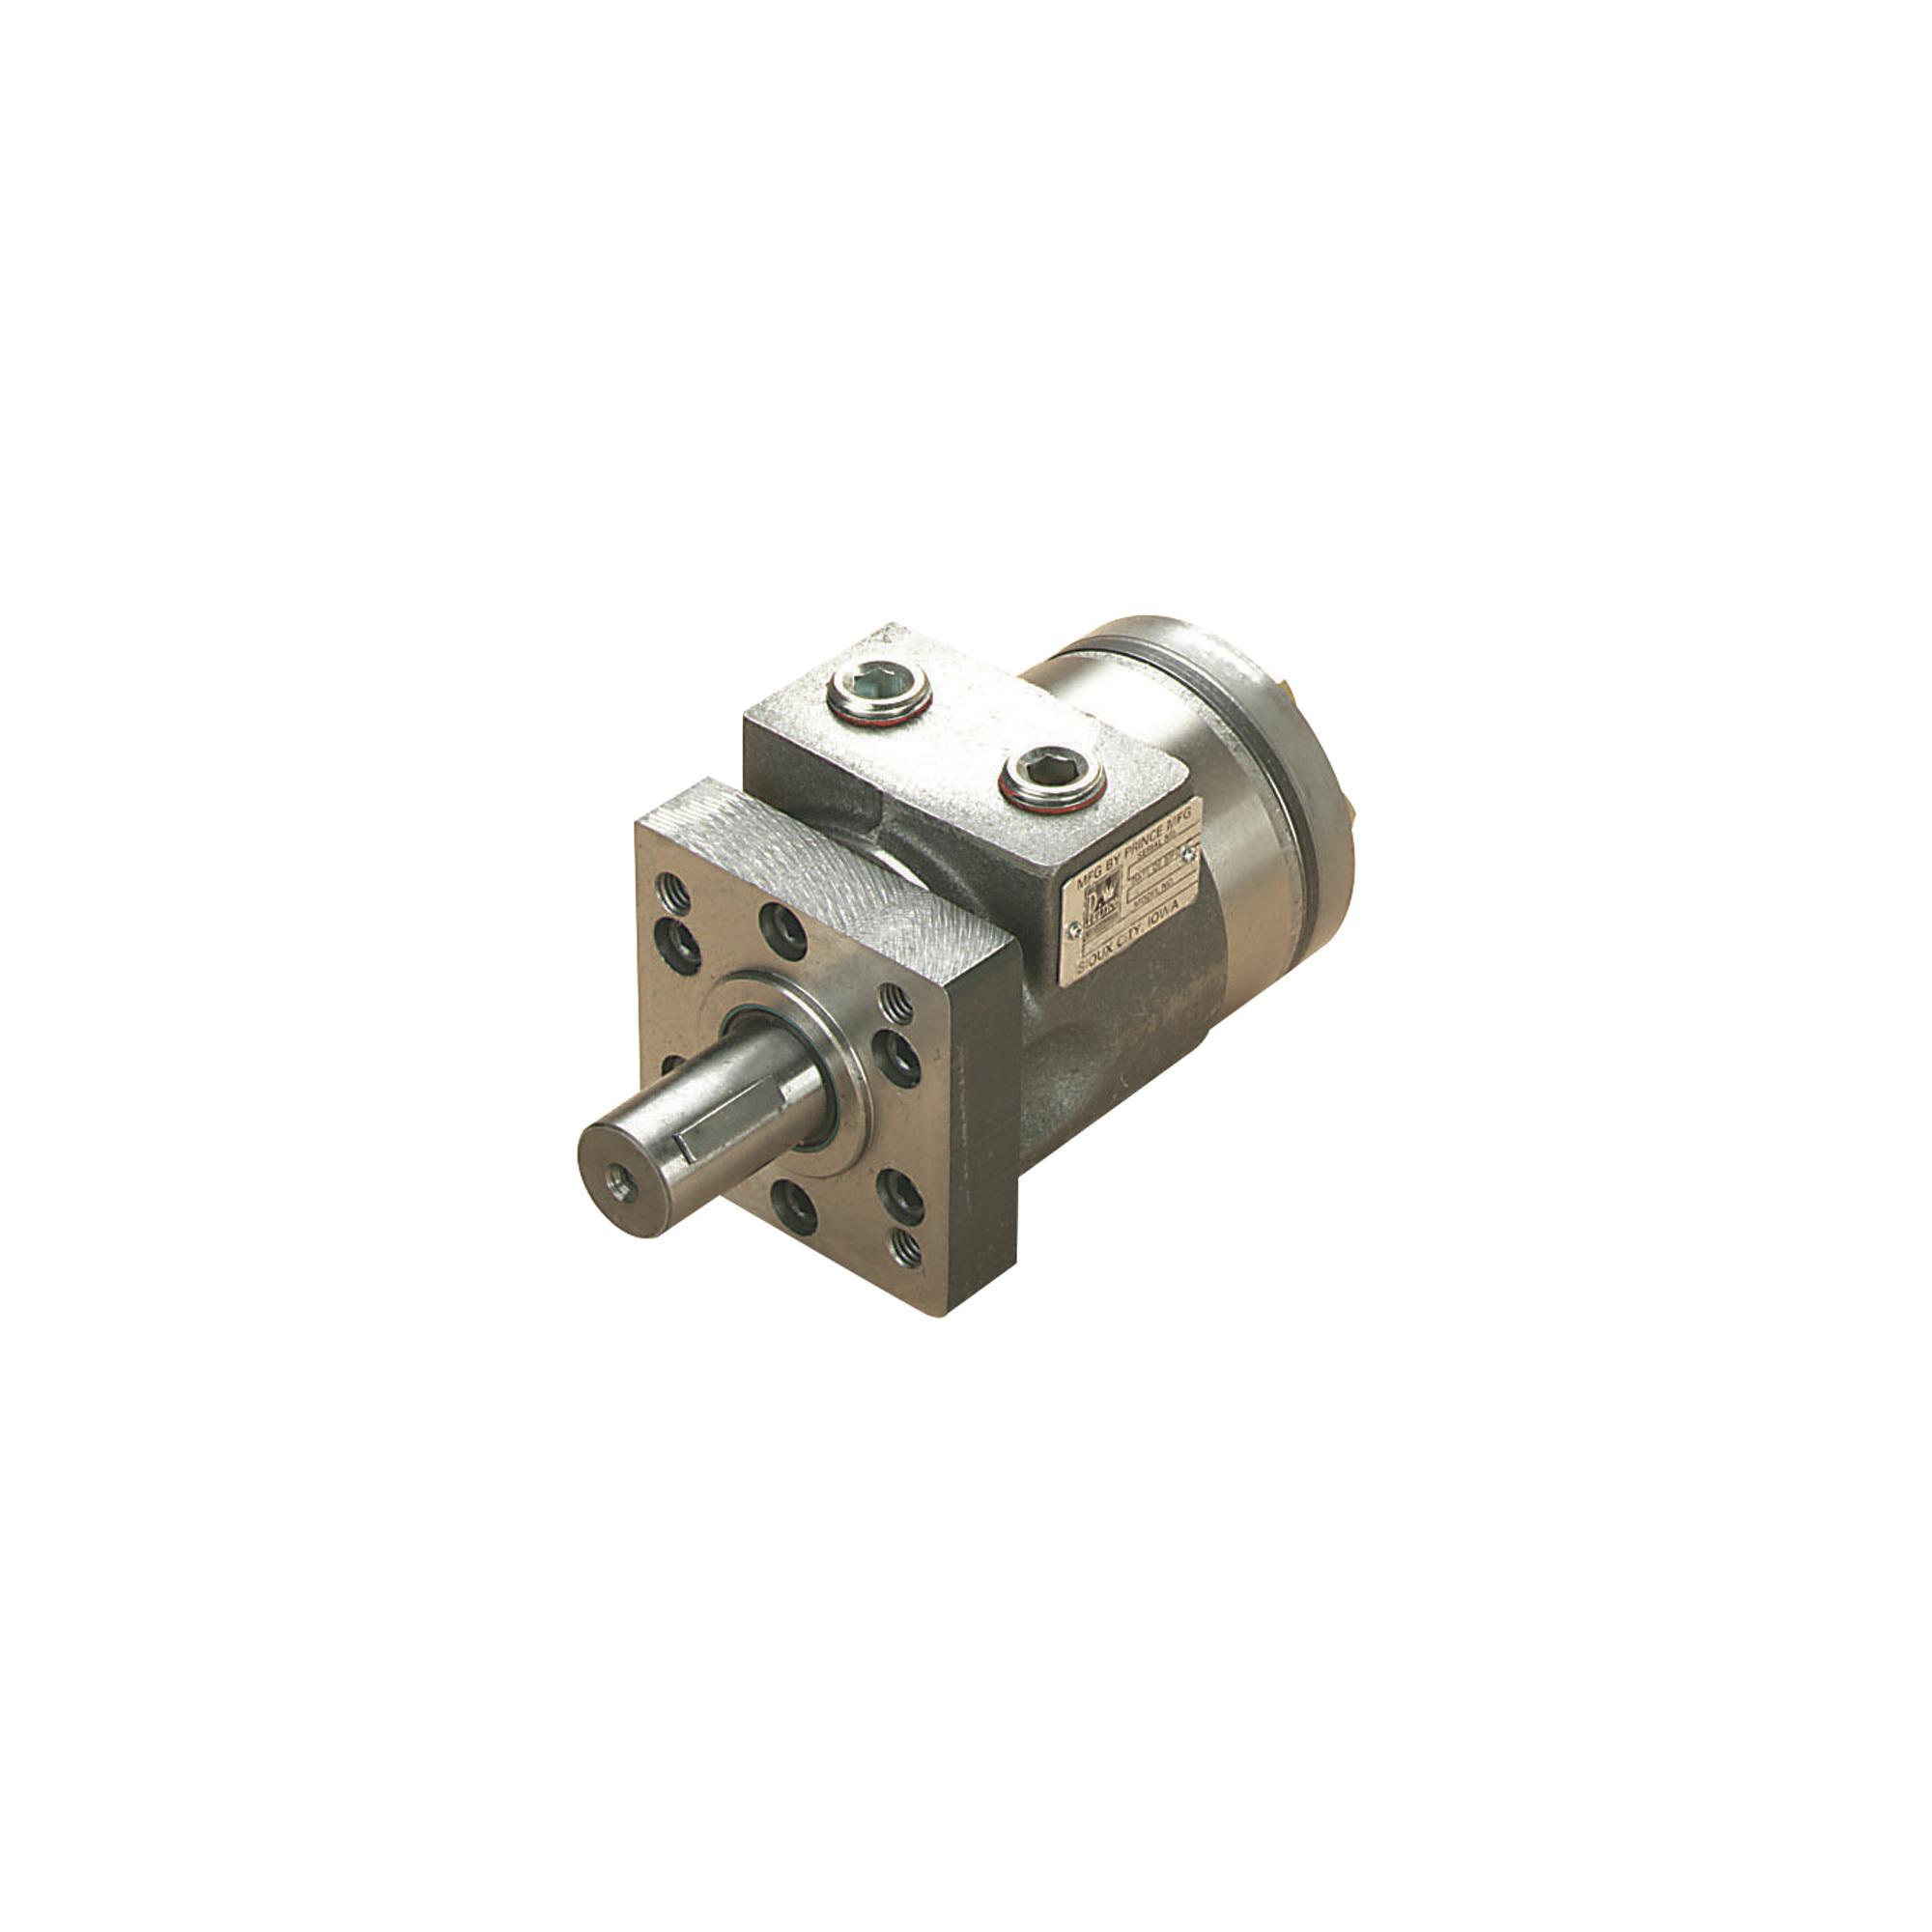 4.3 Heavy Duty Replacement Hydraulic Pump India